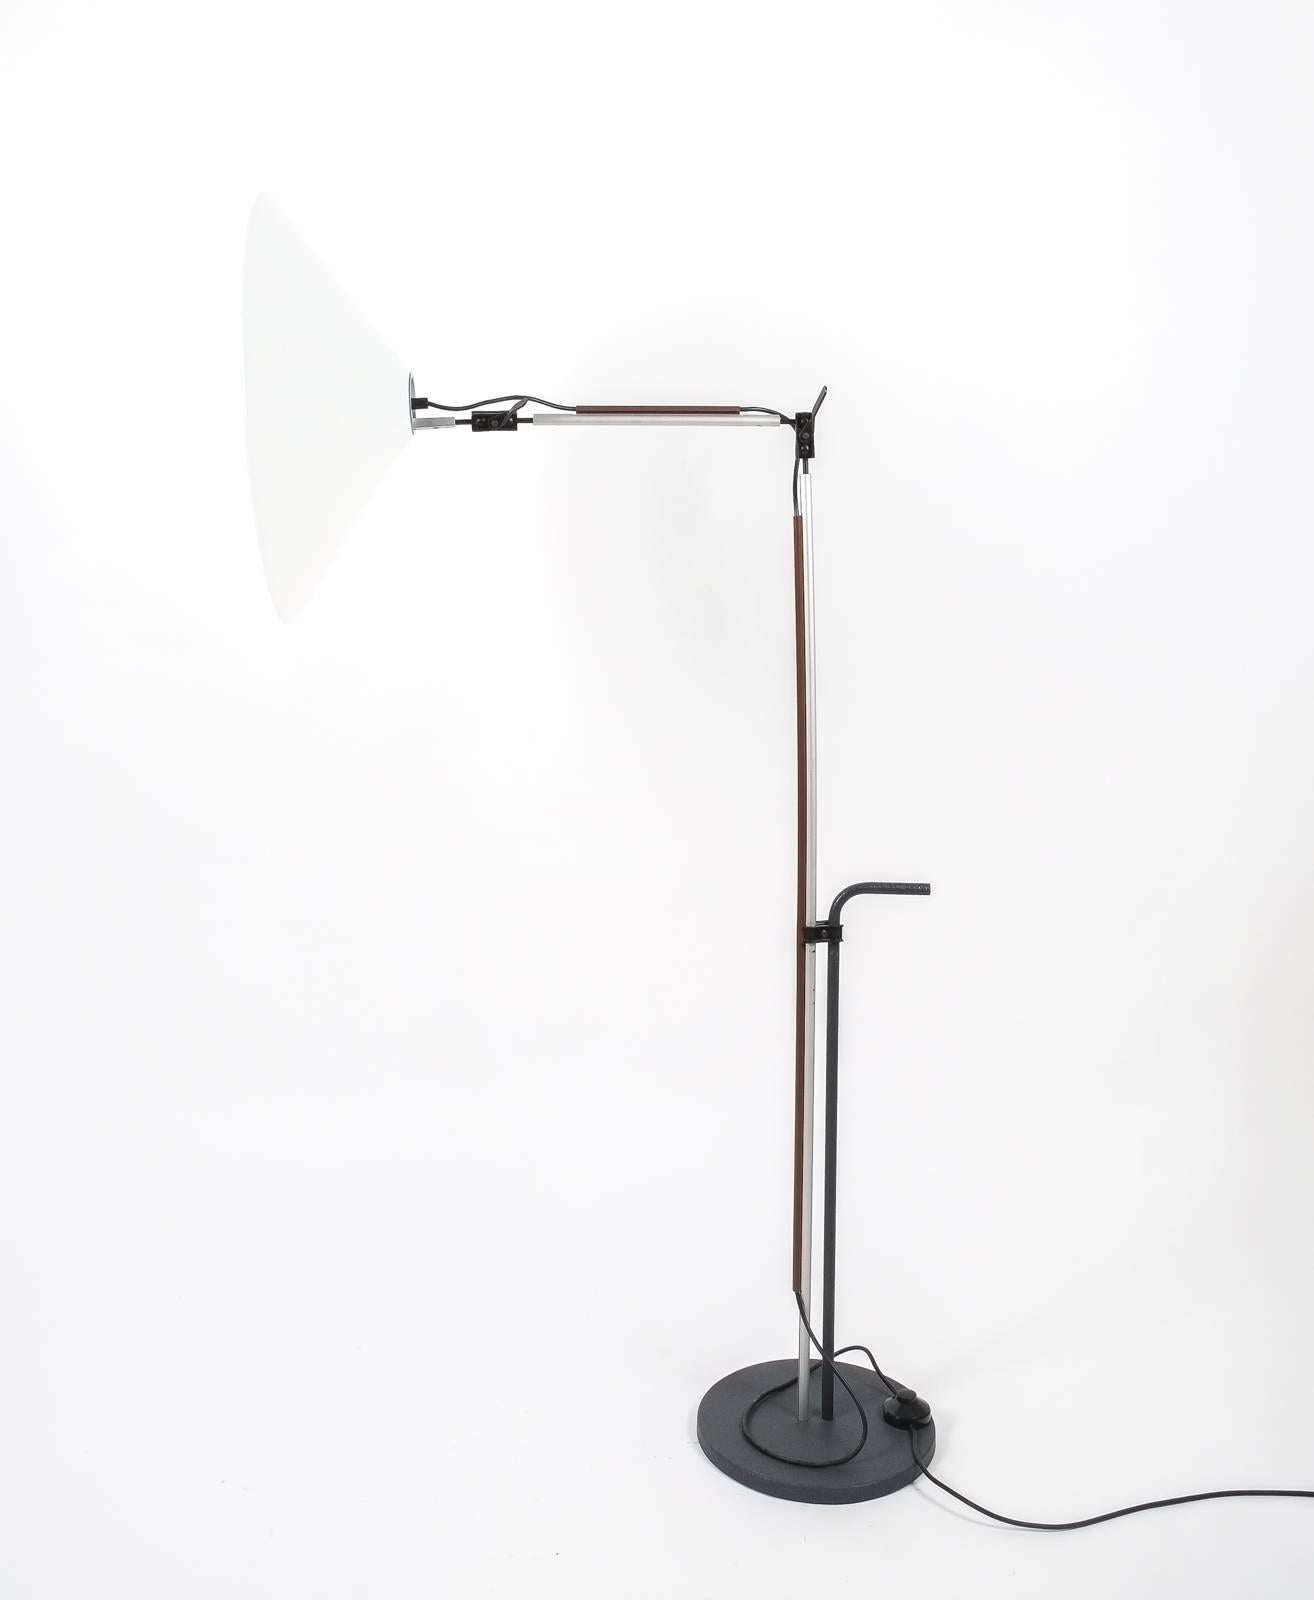 Rare early Aggregato floor lamp designed by Enzo Mari, Italy, circa 1970.
Articulate light with very flexible joints/hinges and a large white acrylic shade with 20 inches in diameter. Very good condition.